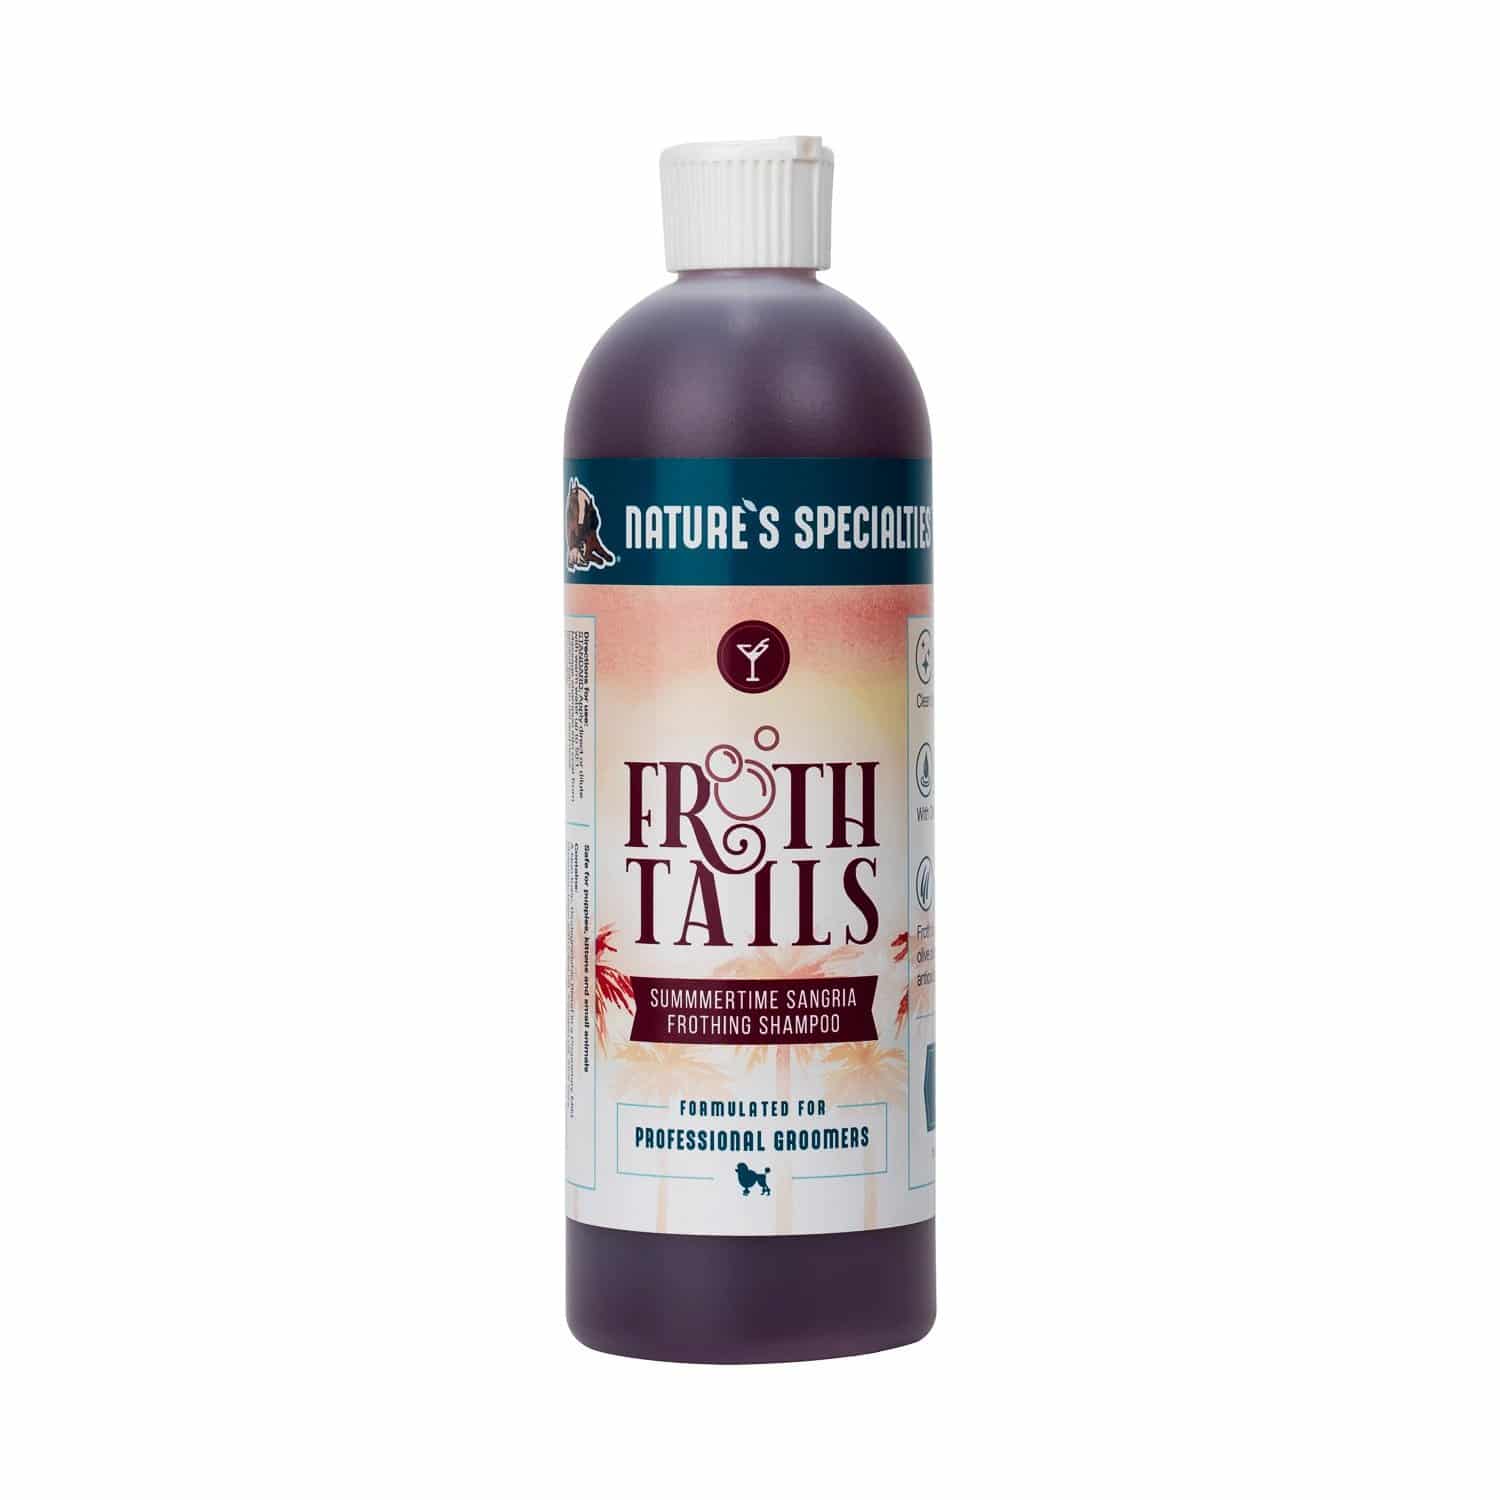 https://www.petstore.direct/wp-content/uploads/2022/05/Froth-Tails-Summertime-Sangria-16oz-Shampoo-1.jpg